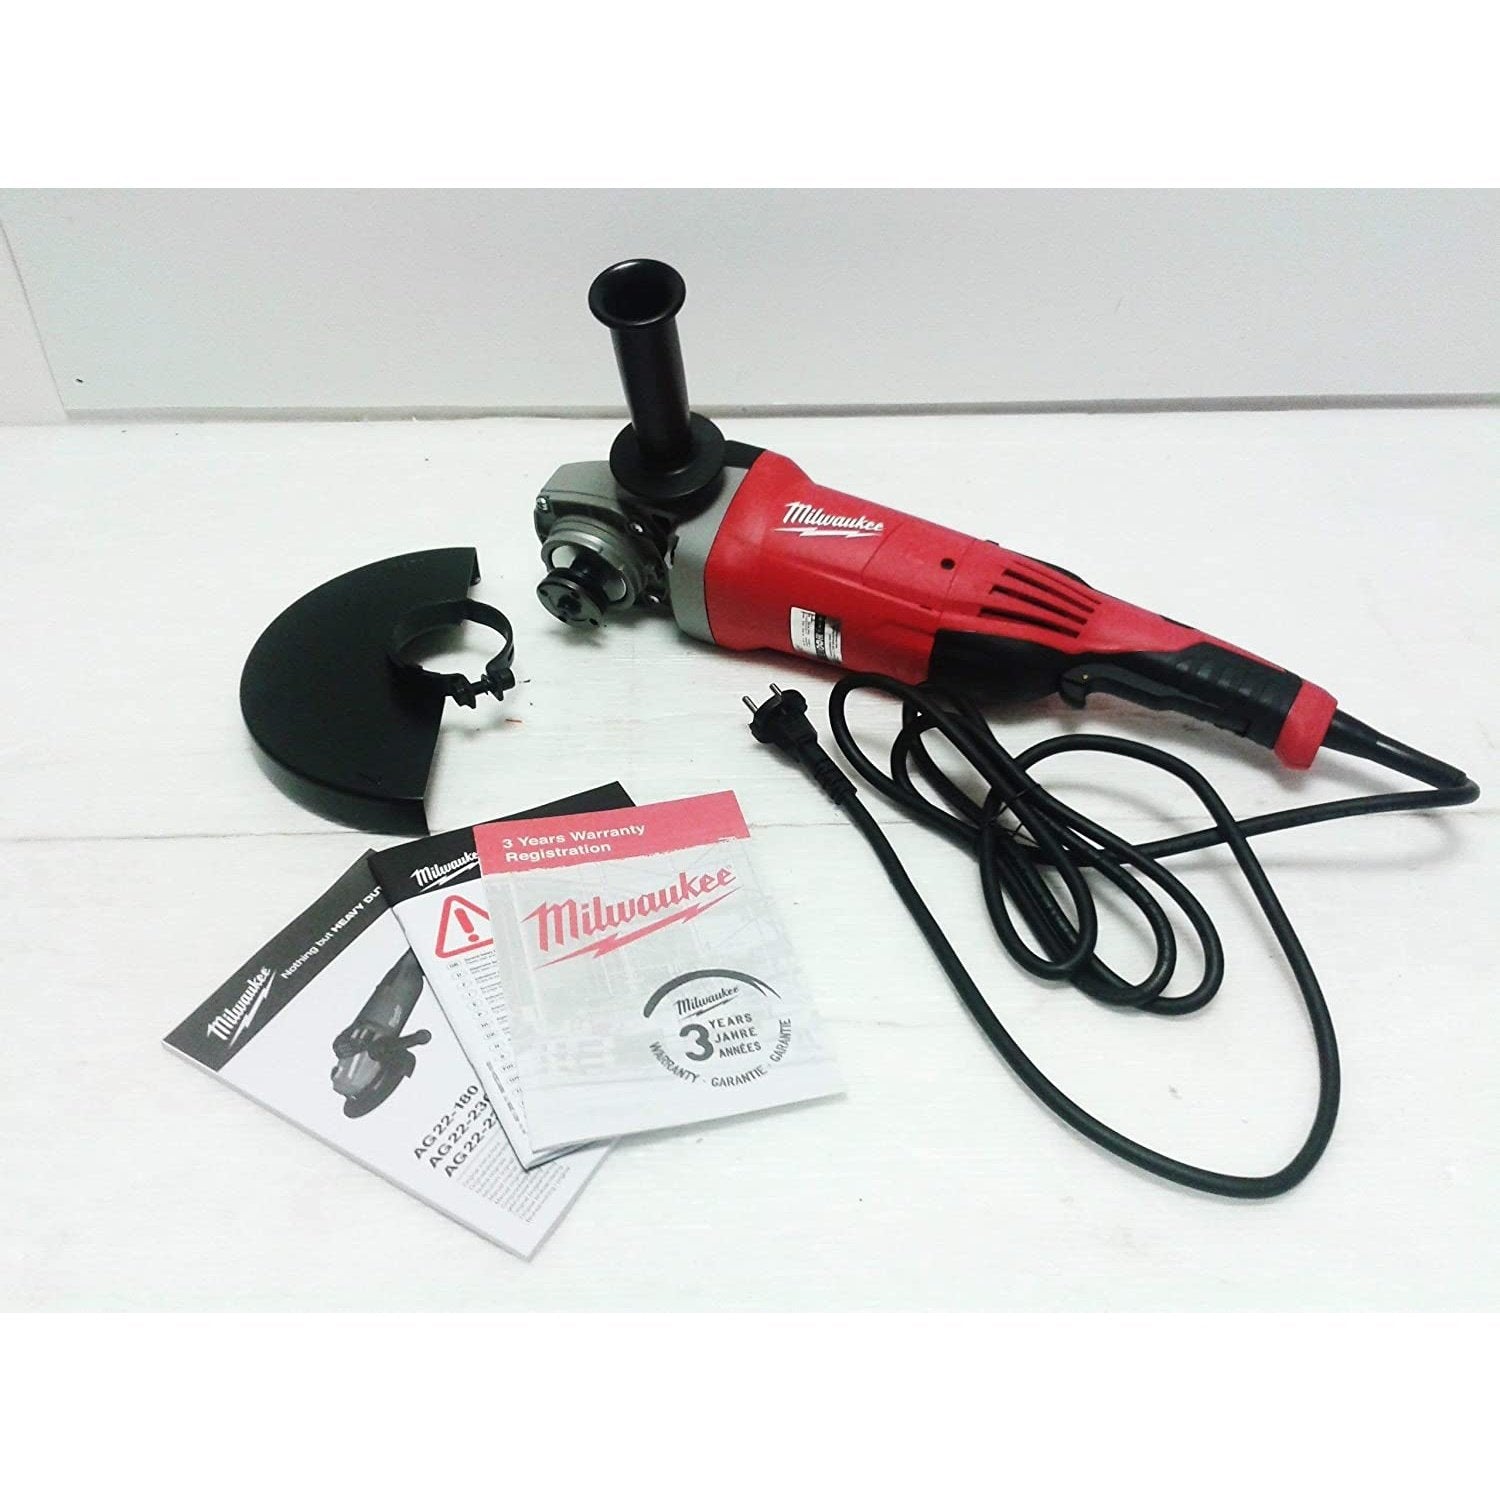 Milwaukee Angle Grinder 230mm 2200W - AG 22-230 DMS | Supply Master | Accra, Ghana Tools Building Steel Engineering Hardware tool